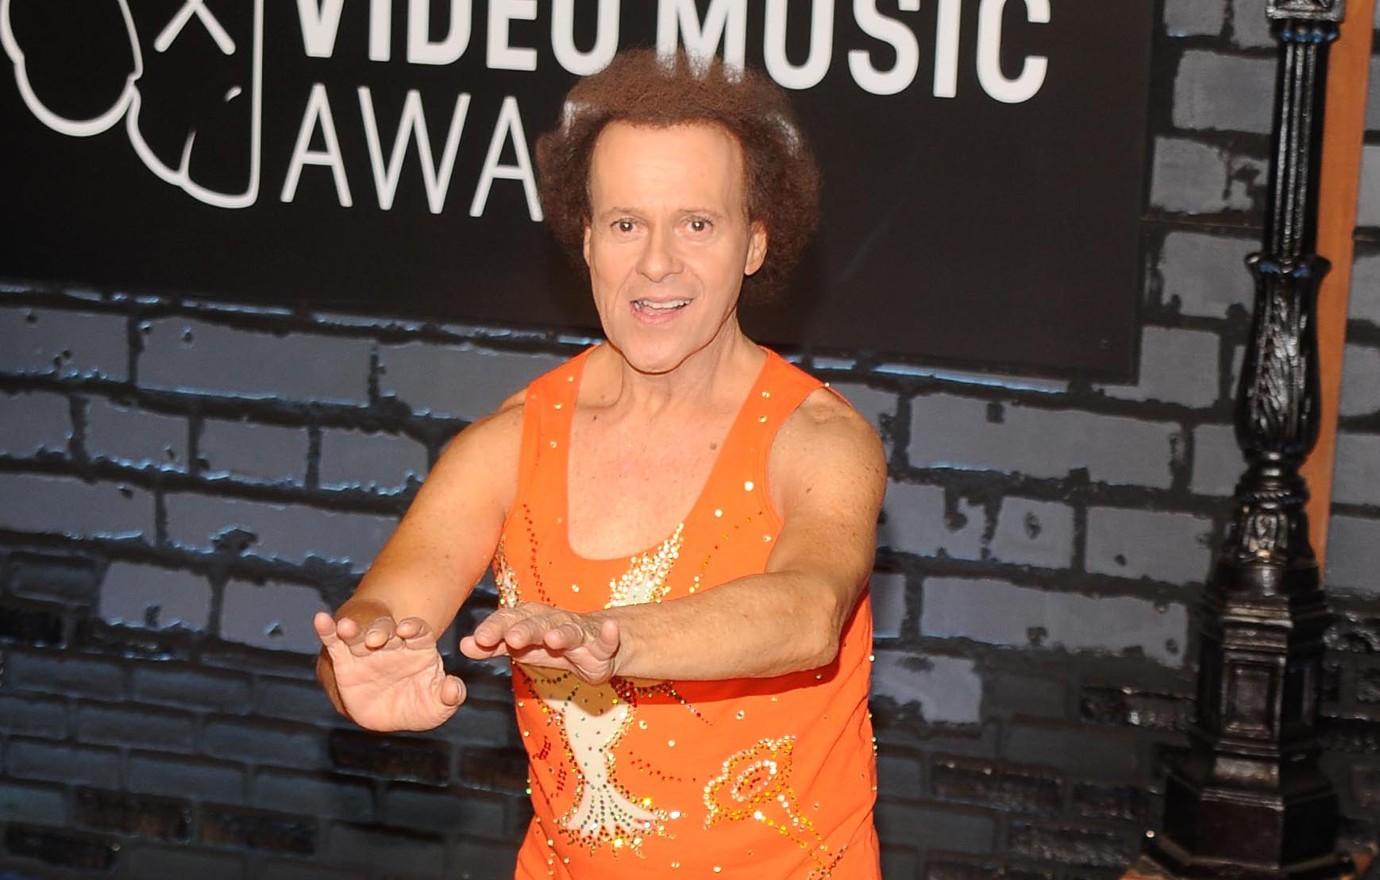 Exercise Guru Richard Simmons Is the Subject of a New Podcast  Vogue